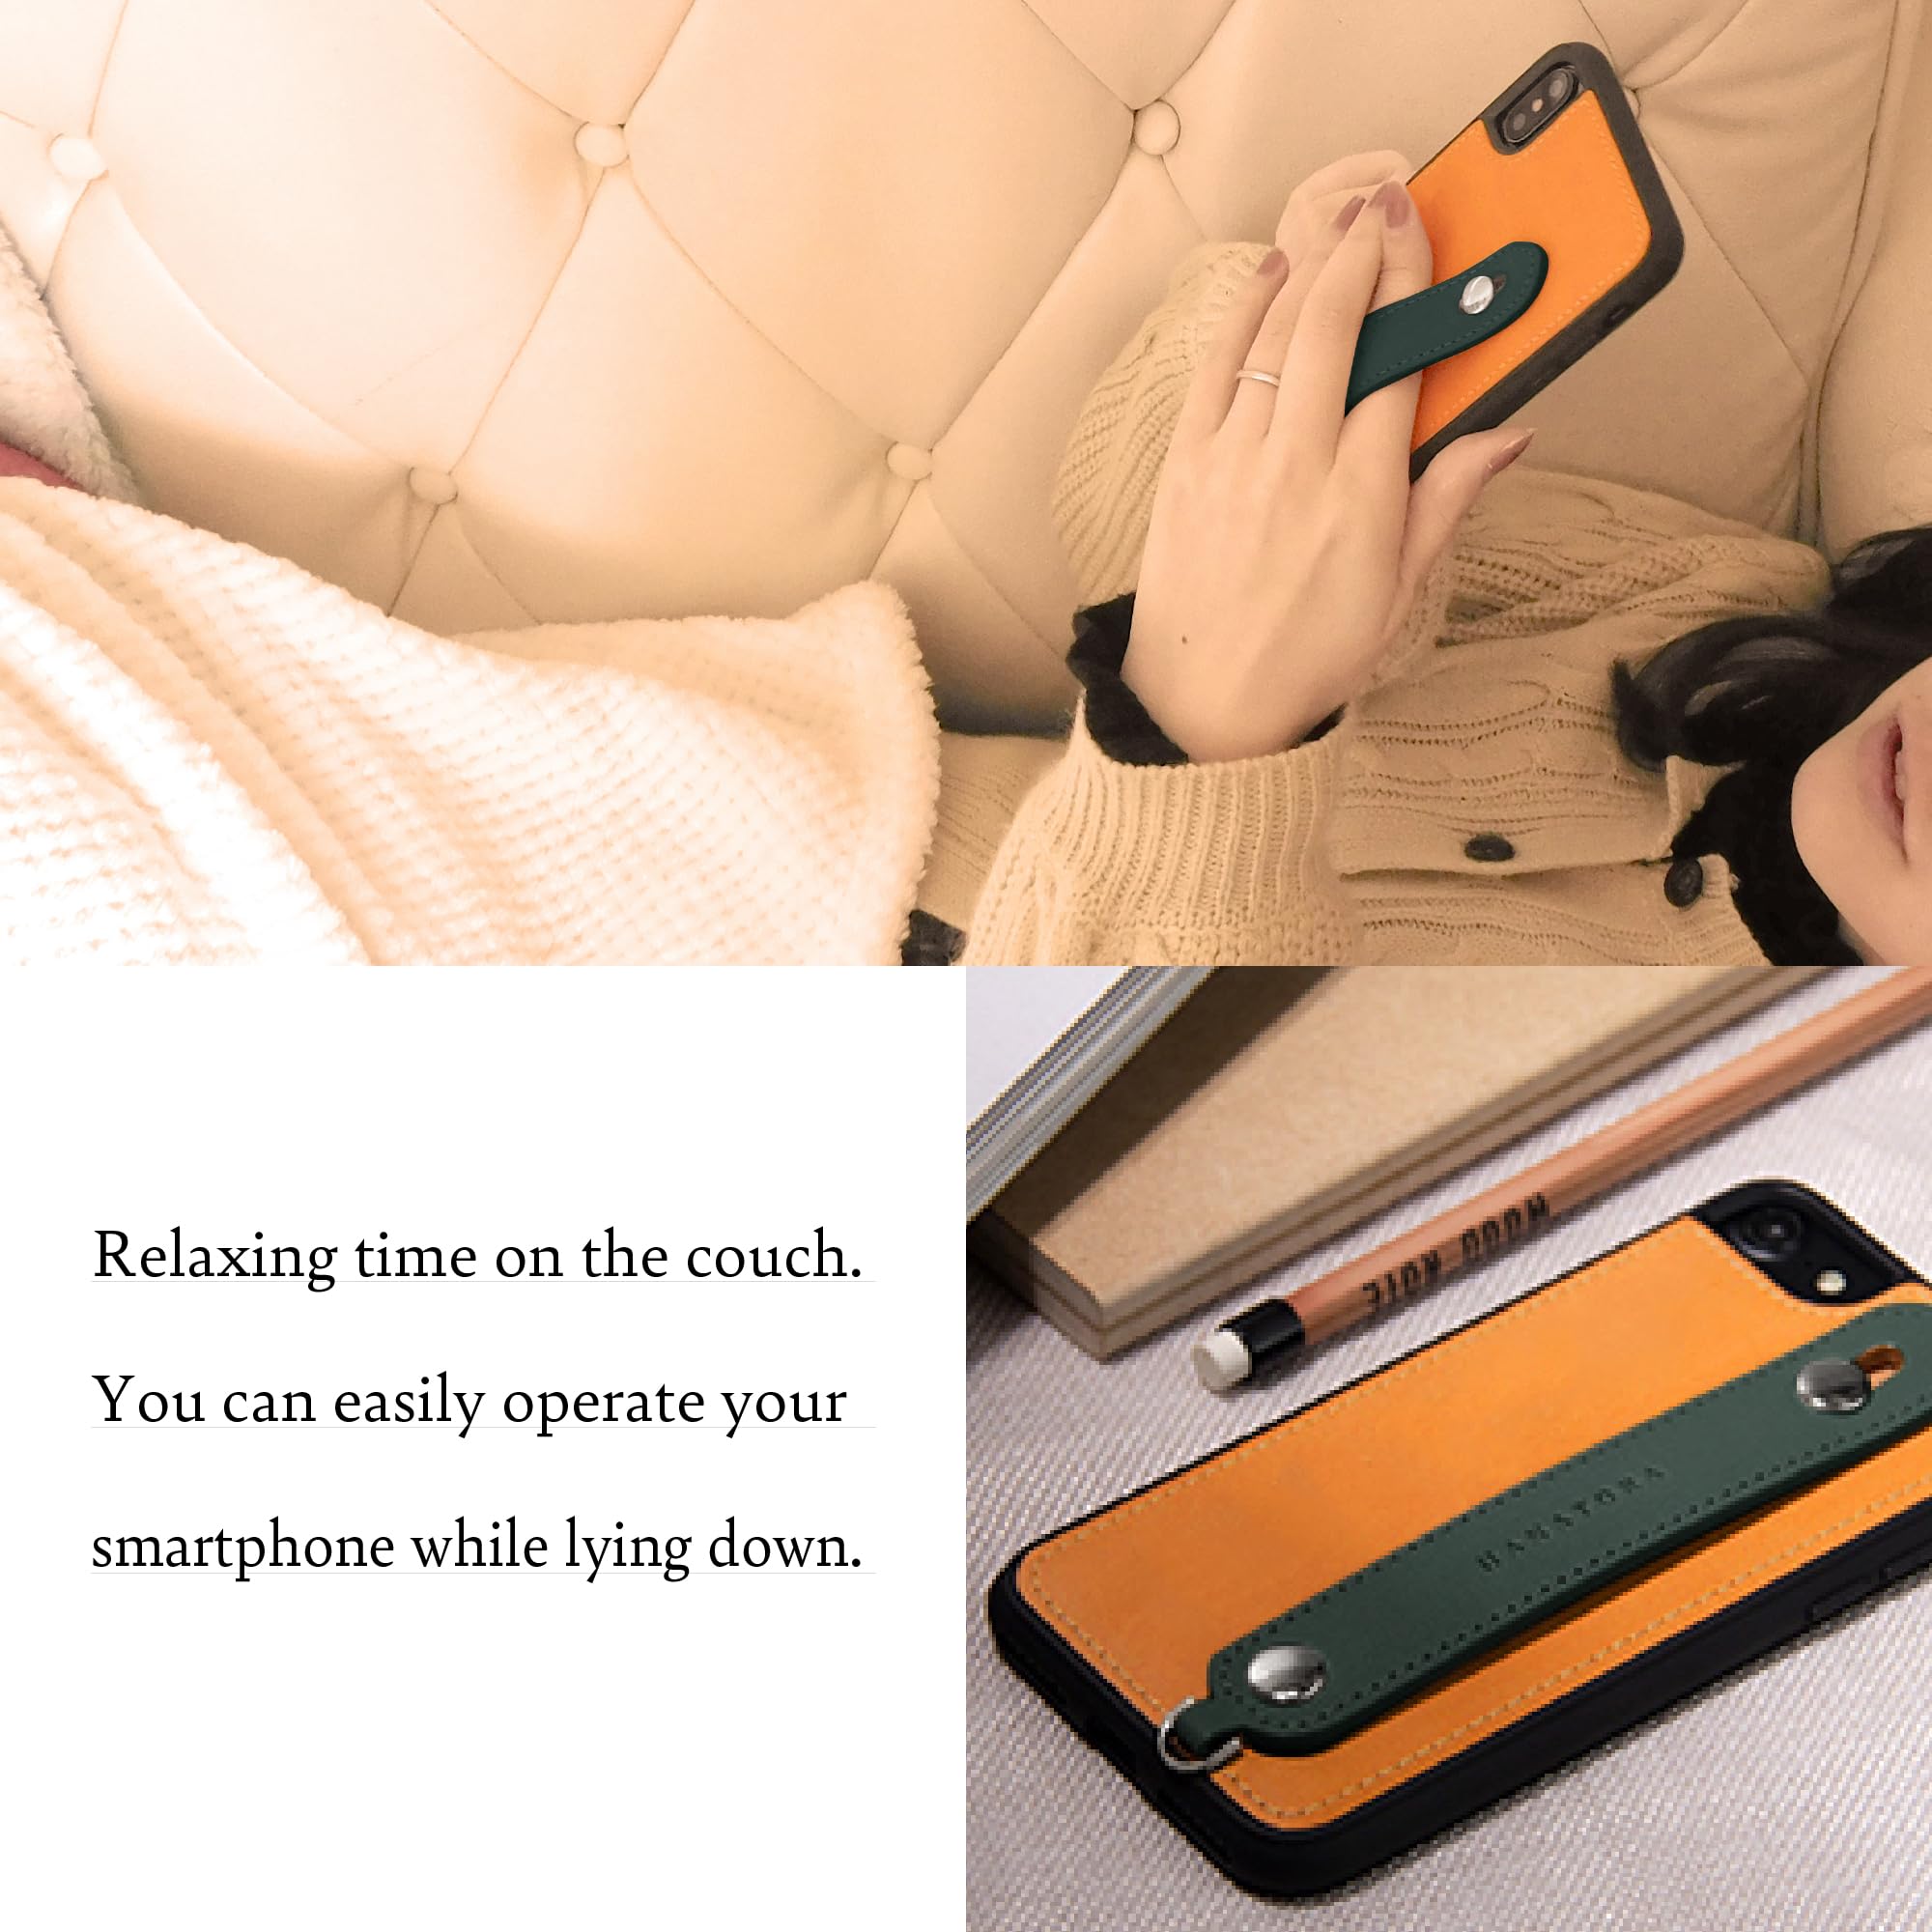 hanatora] iPhone 11 Pro Max Case Genuine Leather Leather Grip Leather Strap Attached Italian Cowhide Tanned Leather One-Handed Card Slot Stand Function Men's Women's Red/Orange CGH-11ProMax-Red-OG-US